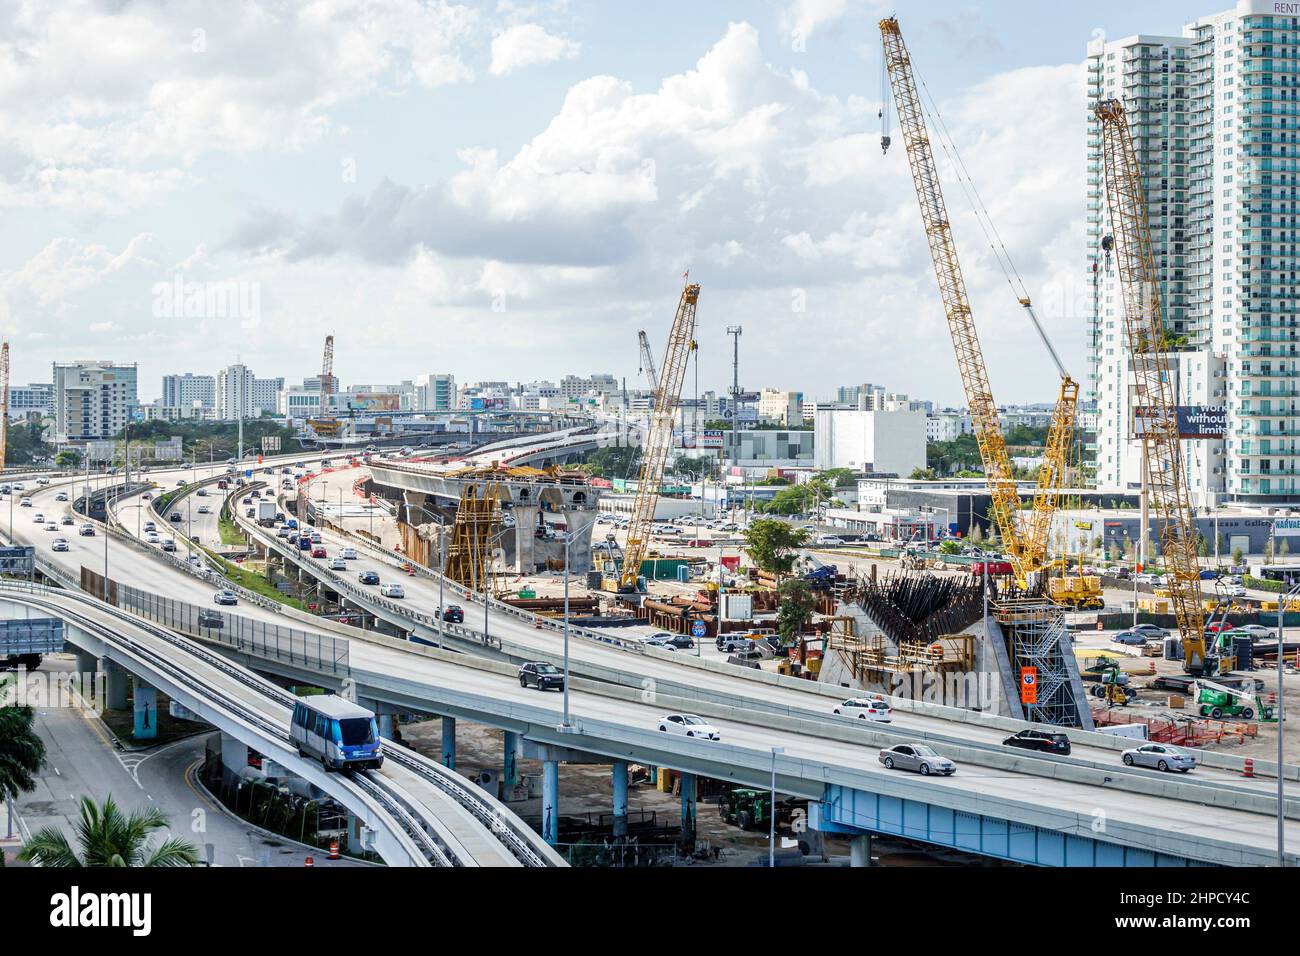 Miami Florida I-395 highway Dolphin Expressway MacArthur Causeway road construction site cranes Metromover rail shuttle people mover free public trans Stock Photo